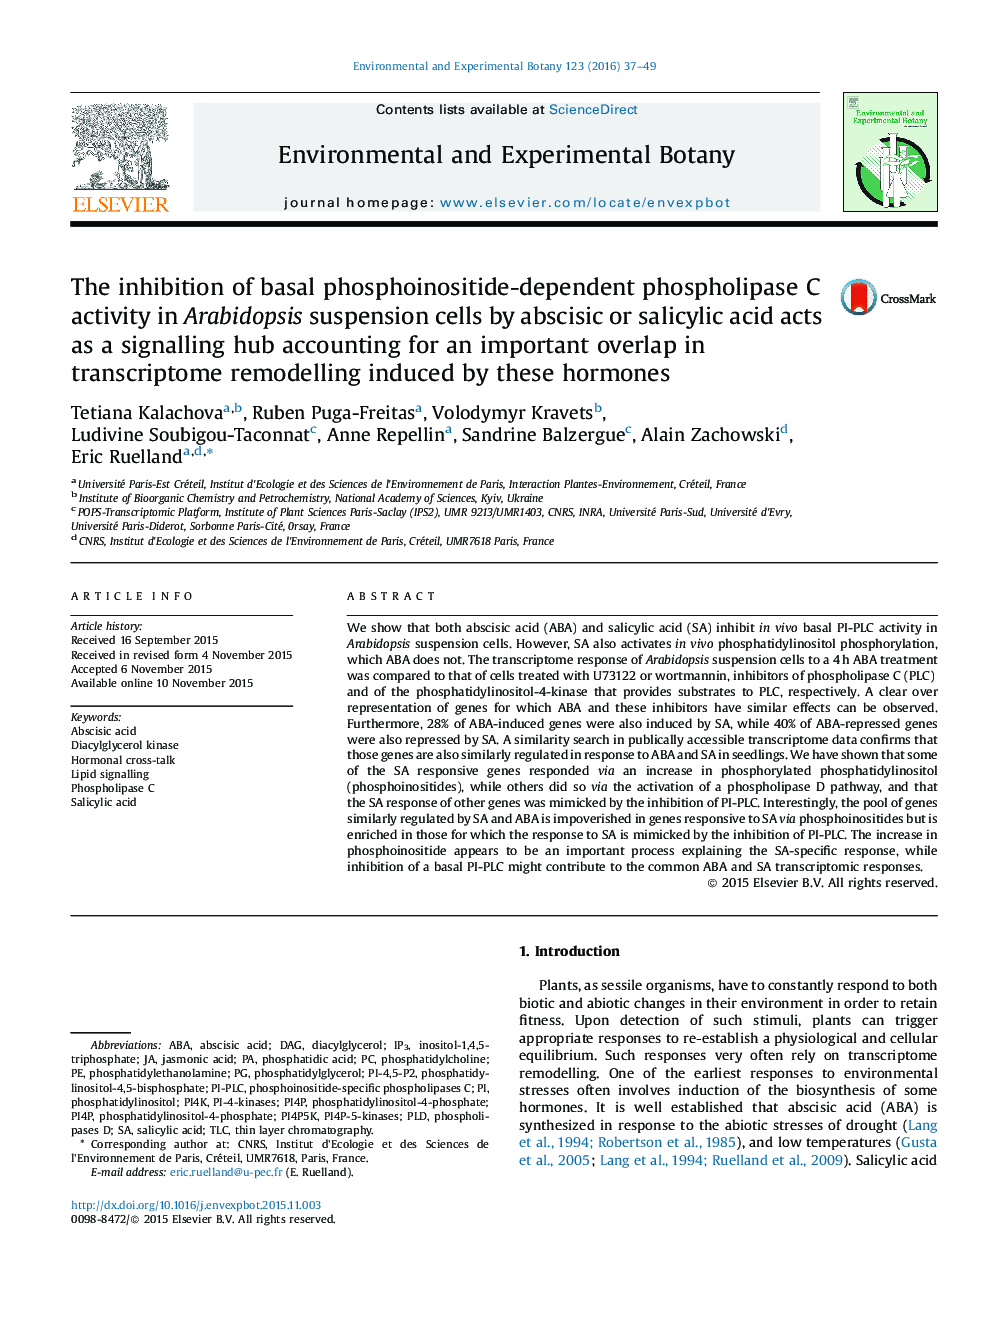 The inhibition of basal phosphoinositide-dependent phospholipase C activity in Arabidopsis suspension cells by abscisic or salicylic acid acts as a signalling hub accounting for an important overlap in transcriptome remodelling induced by these hormones